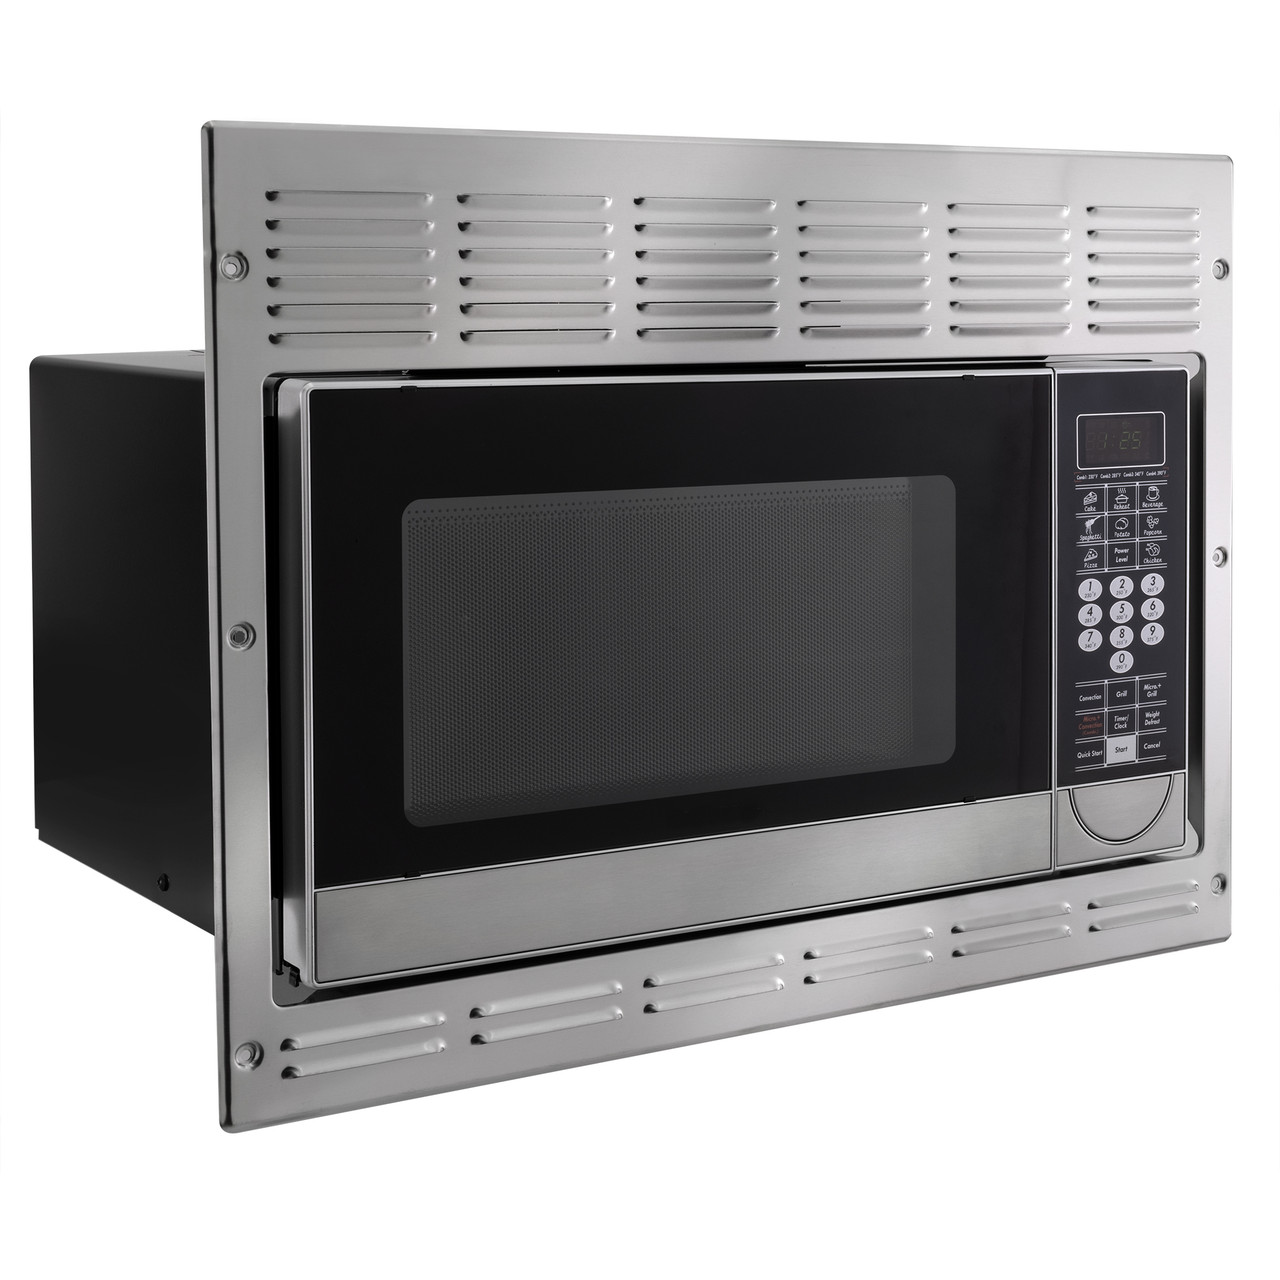 https://cdn11.bigcommerce.com/s-kwuh809851/images/stencil/1280x1280/products/2623/23128/RPM-4-SS-1.0-Microwave-Blk-Greystone-3-4__18548.1698425811.jpg?c=2